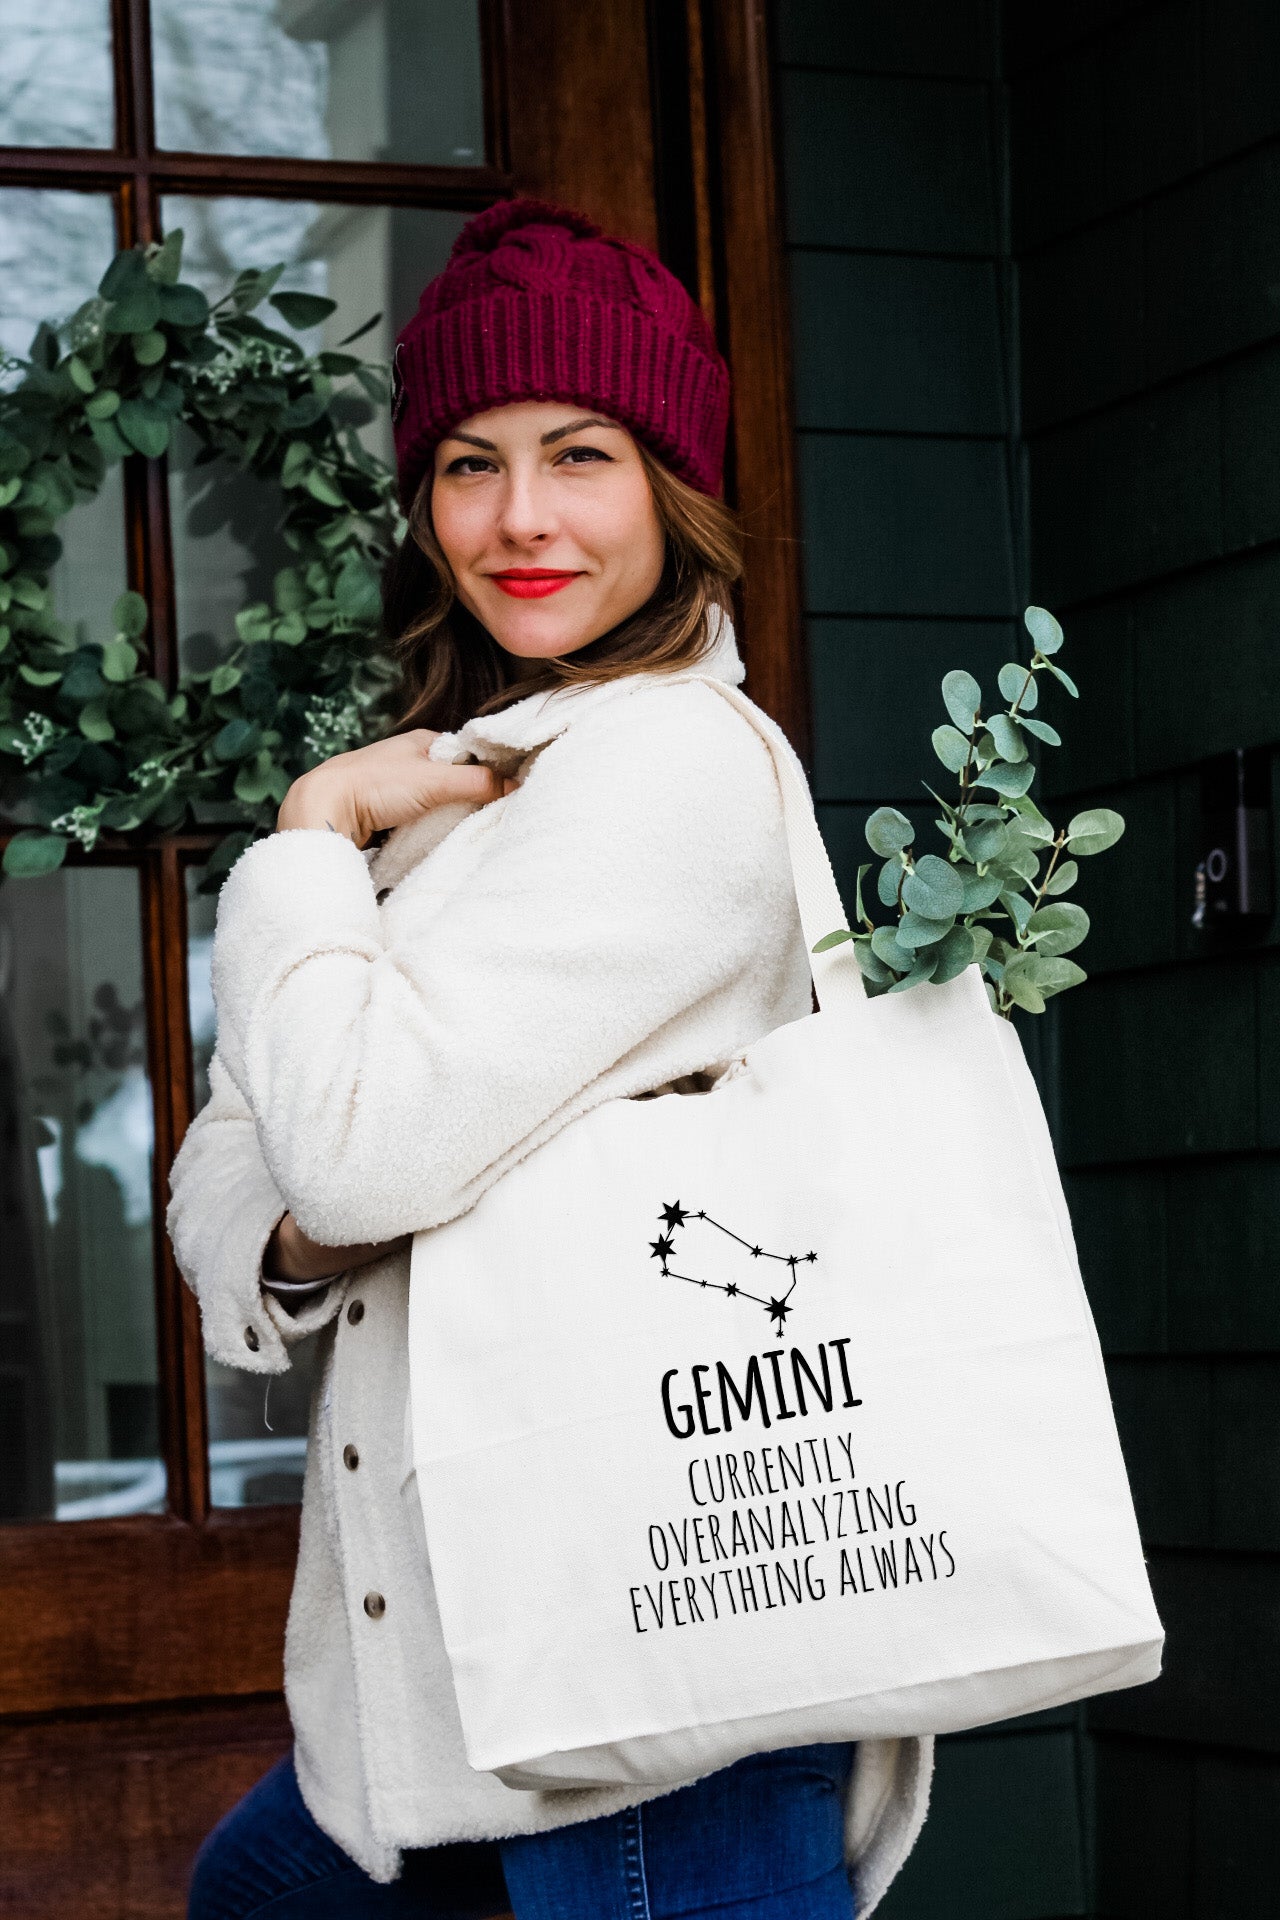 Gemini Zodiac (Currently Overanalyzing Everything) - Tote Bag - MoonlightMakers